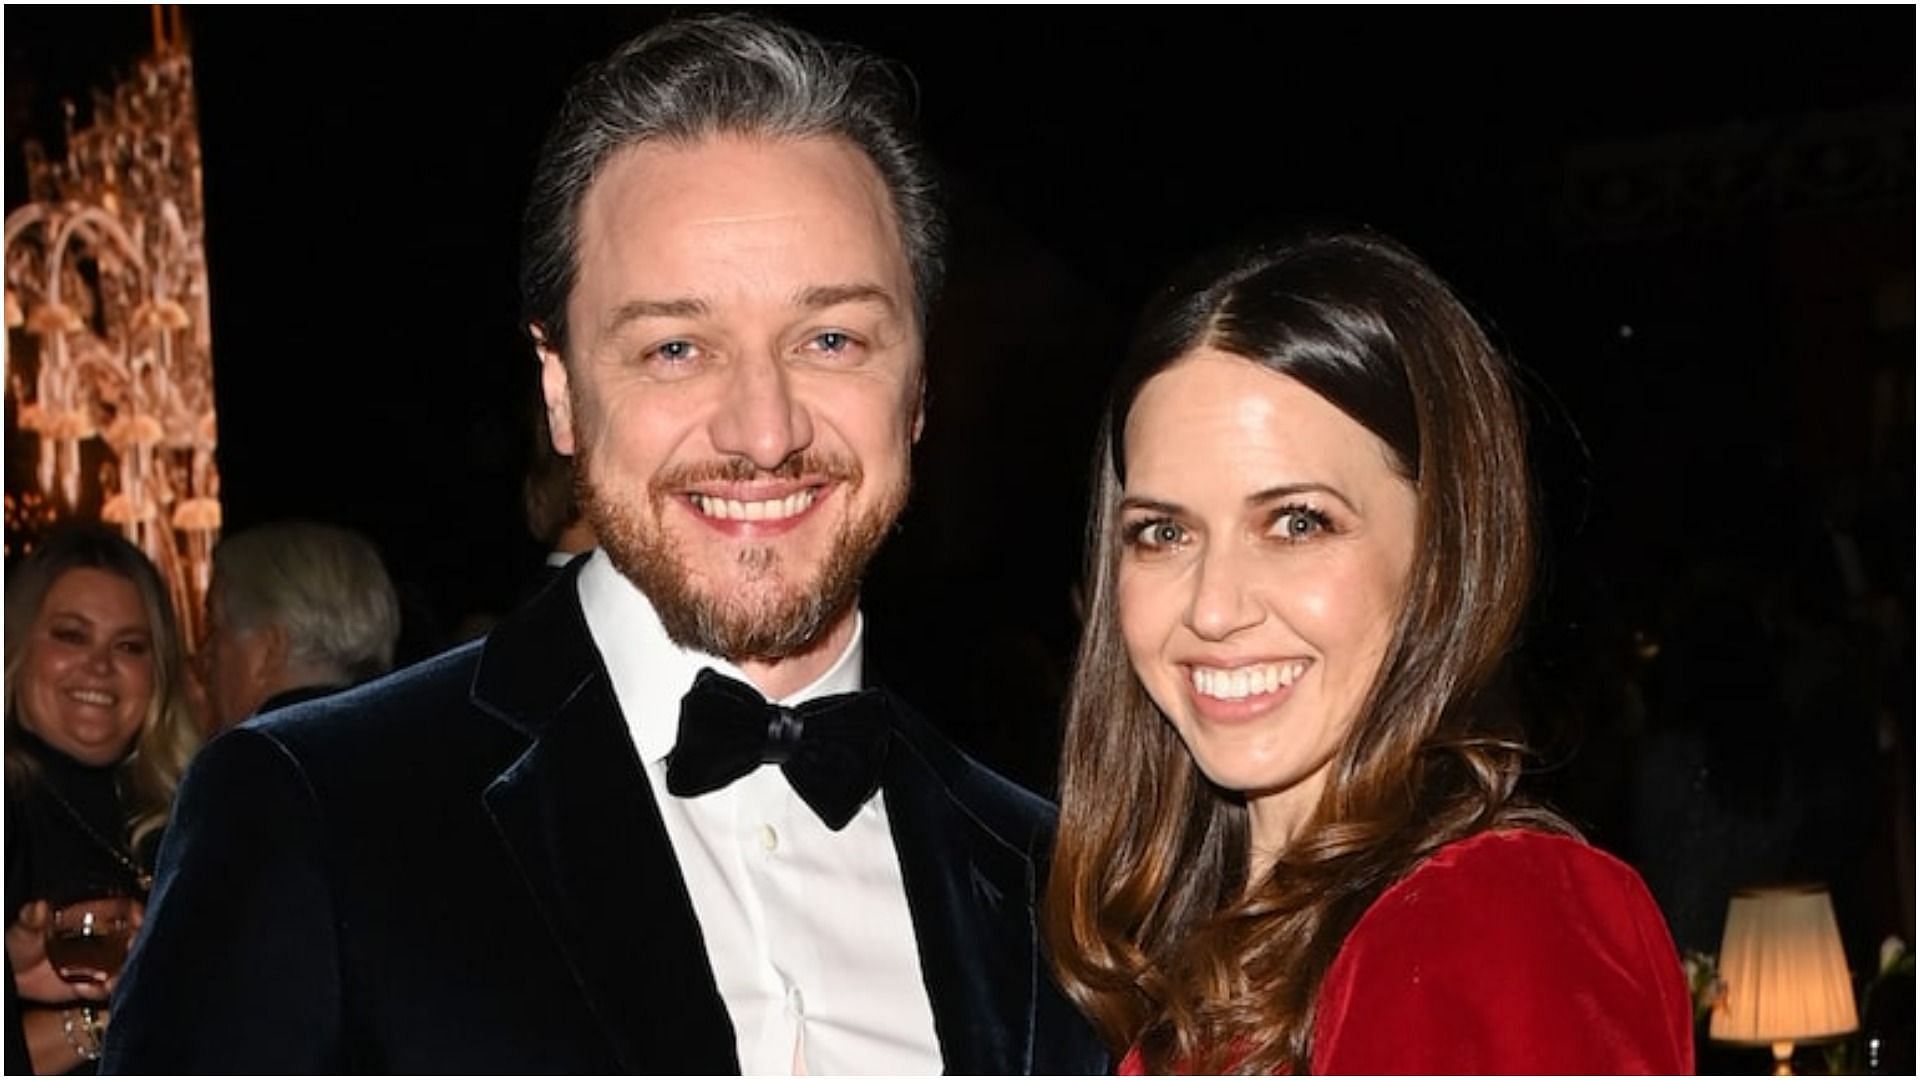 James Mcavoy and Lisa Liberati began dating in 2018 after first meeting on the set of the film Split (Image via Getty Images/Kate Green)